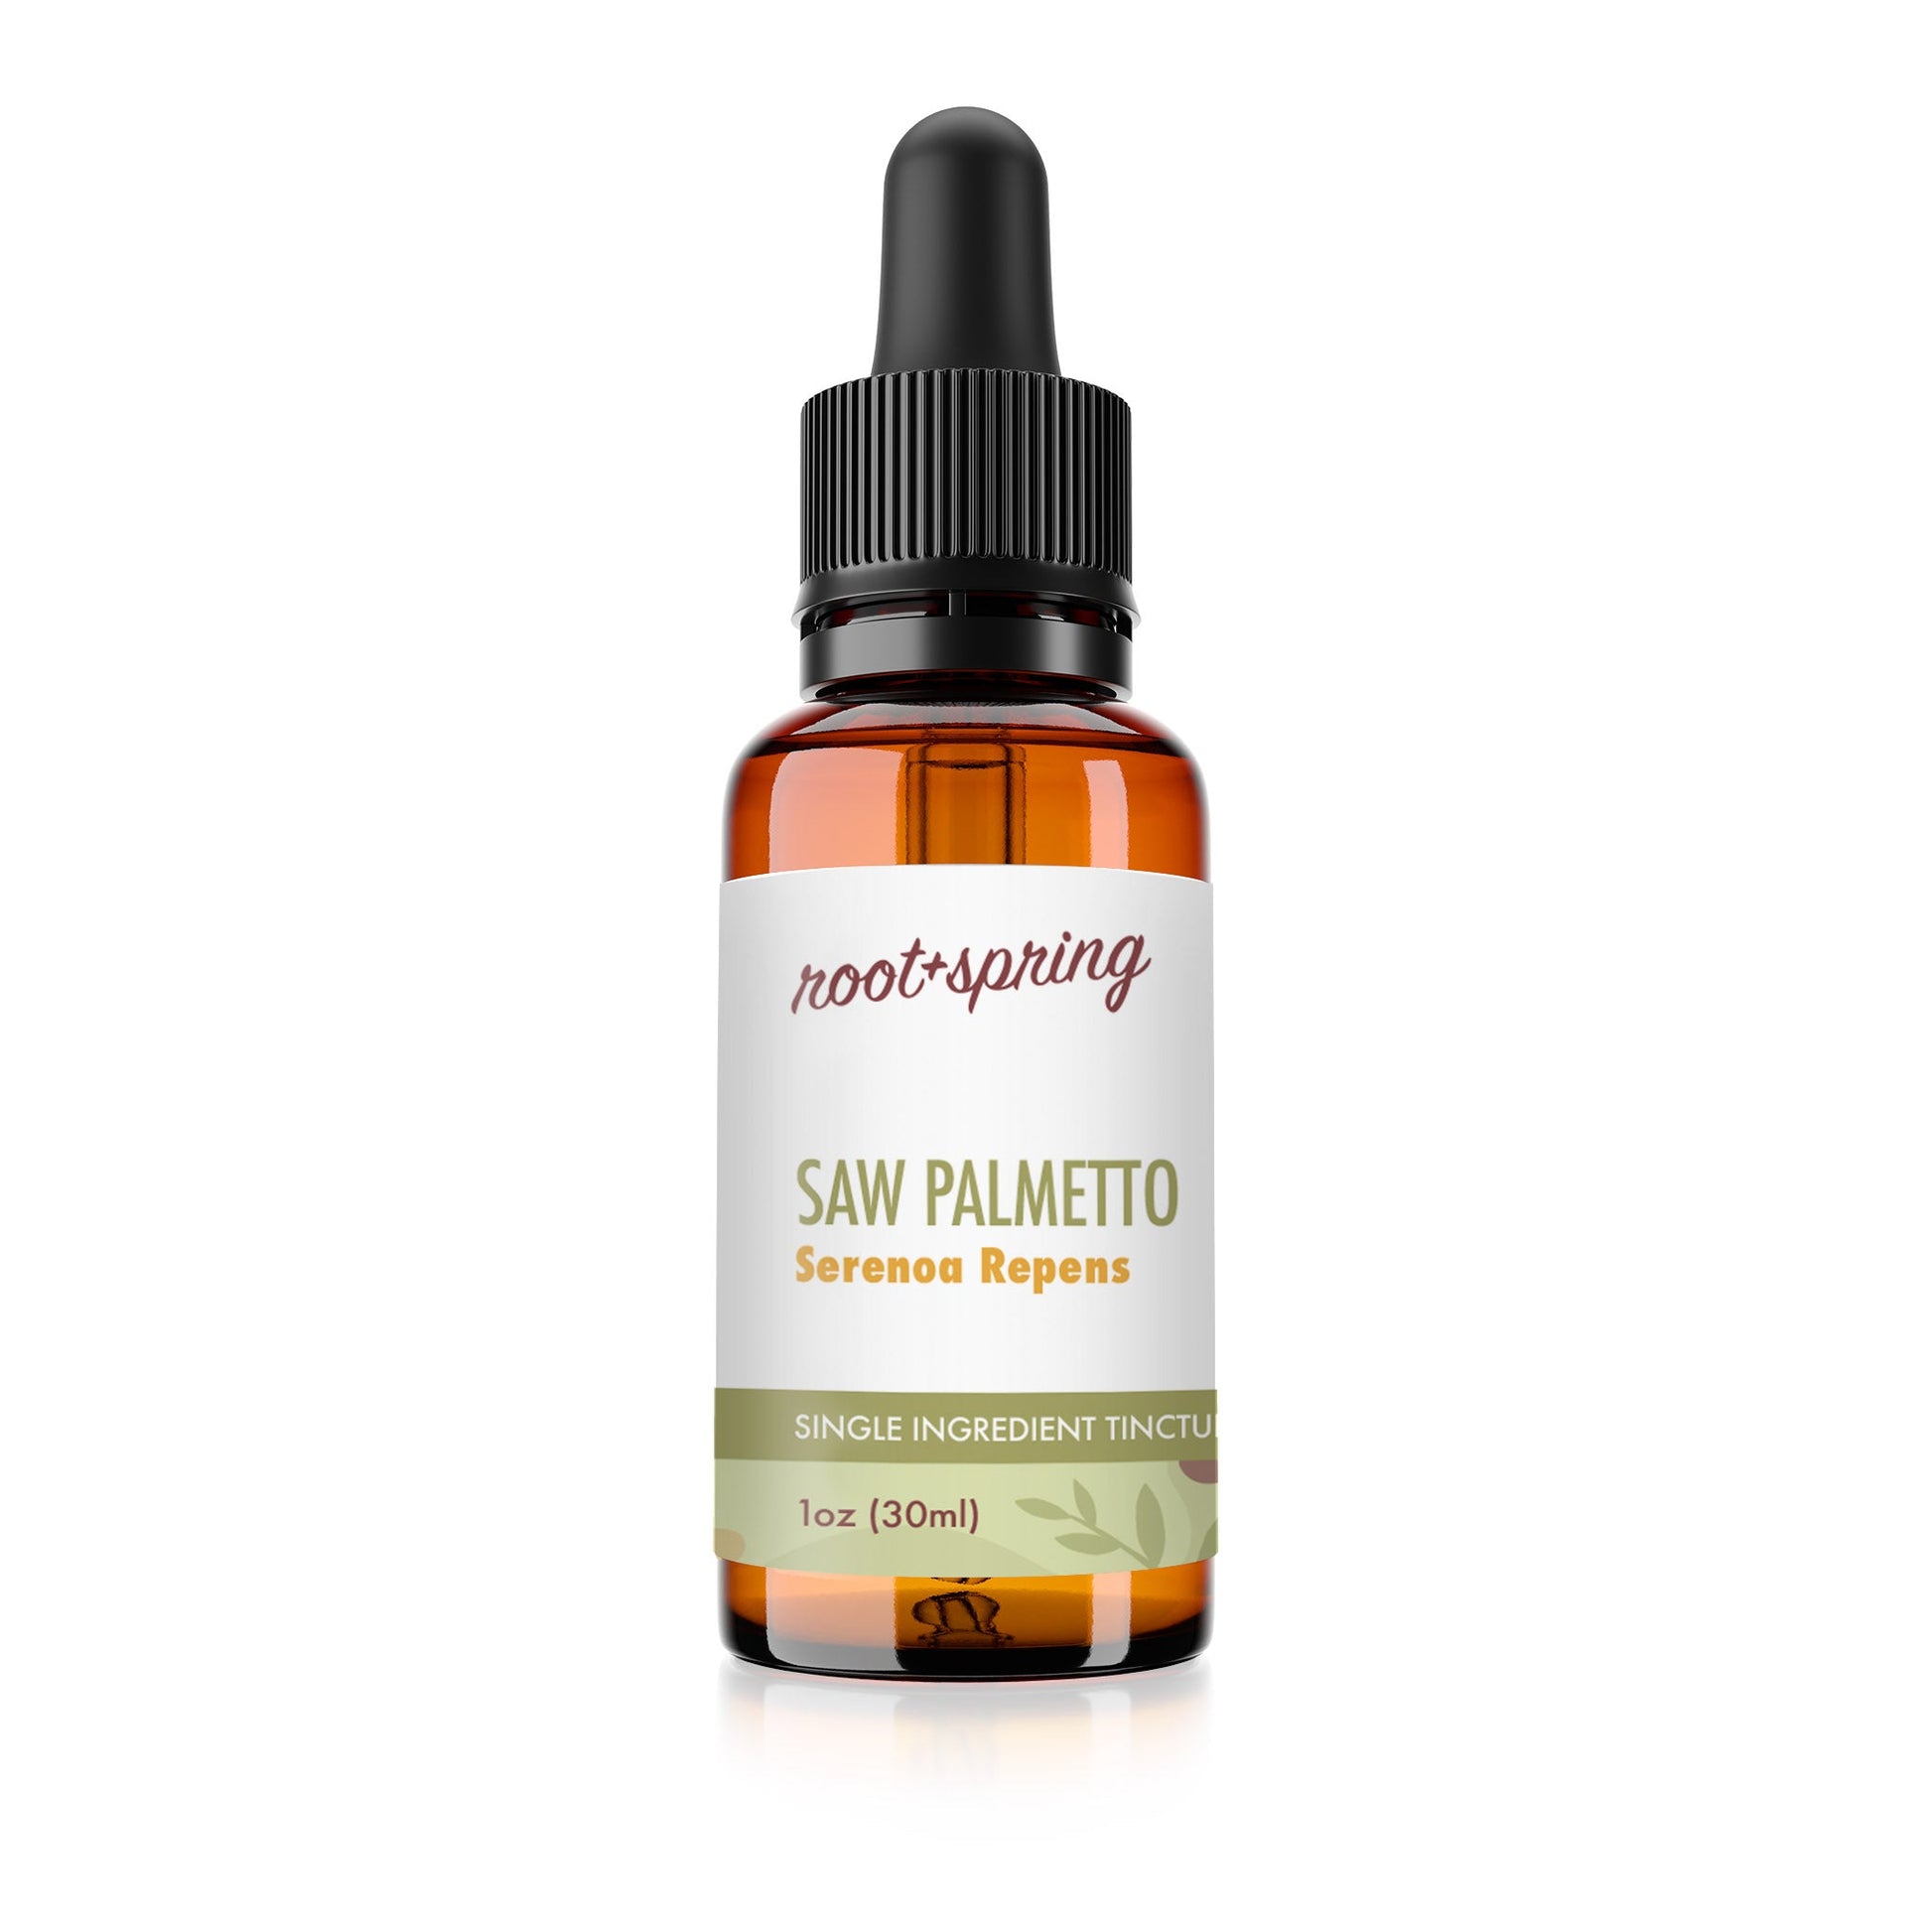 Bottle of Saw Palmetto, Serenoa Repens Herbal Tincture by rooth + spring